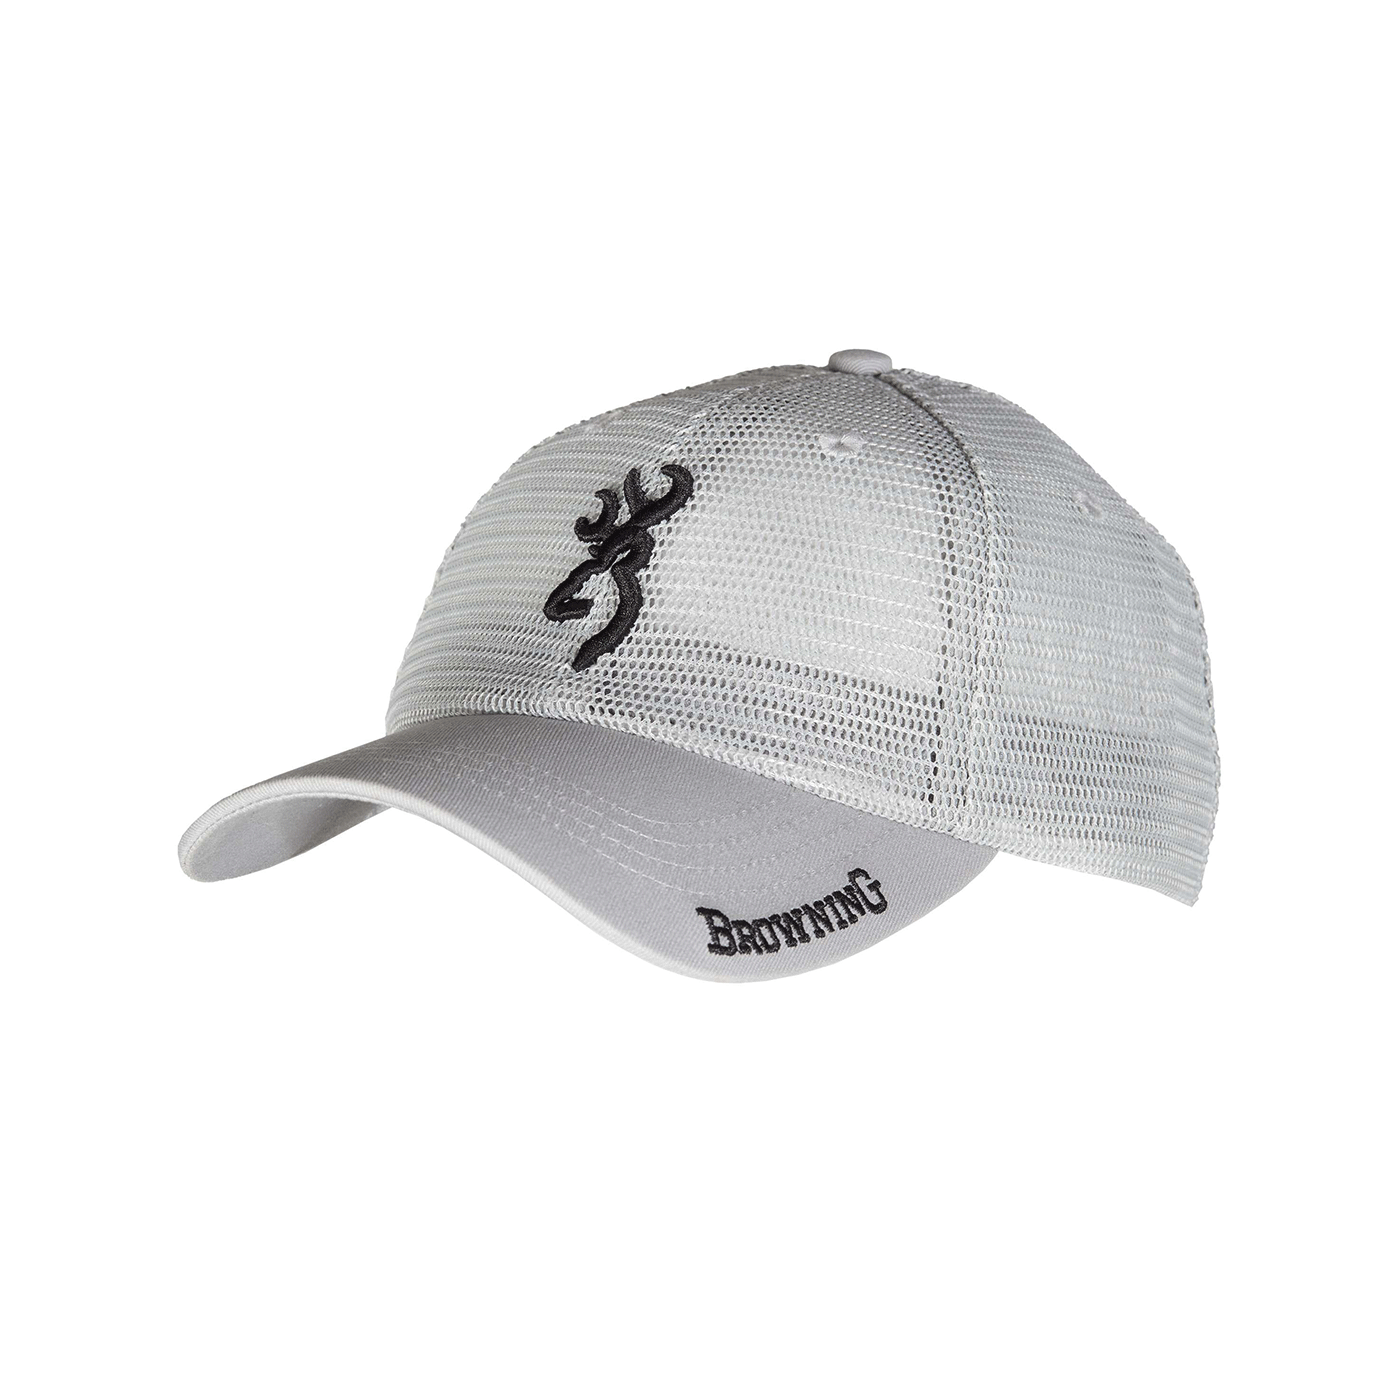 CAPPELLO - BROWNING - CAP TIME GREY LIGHT